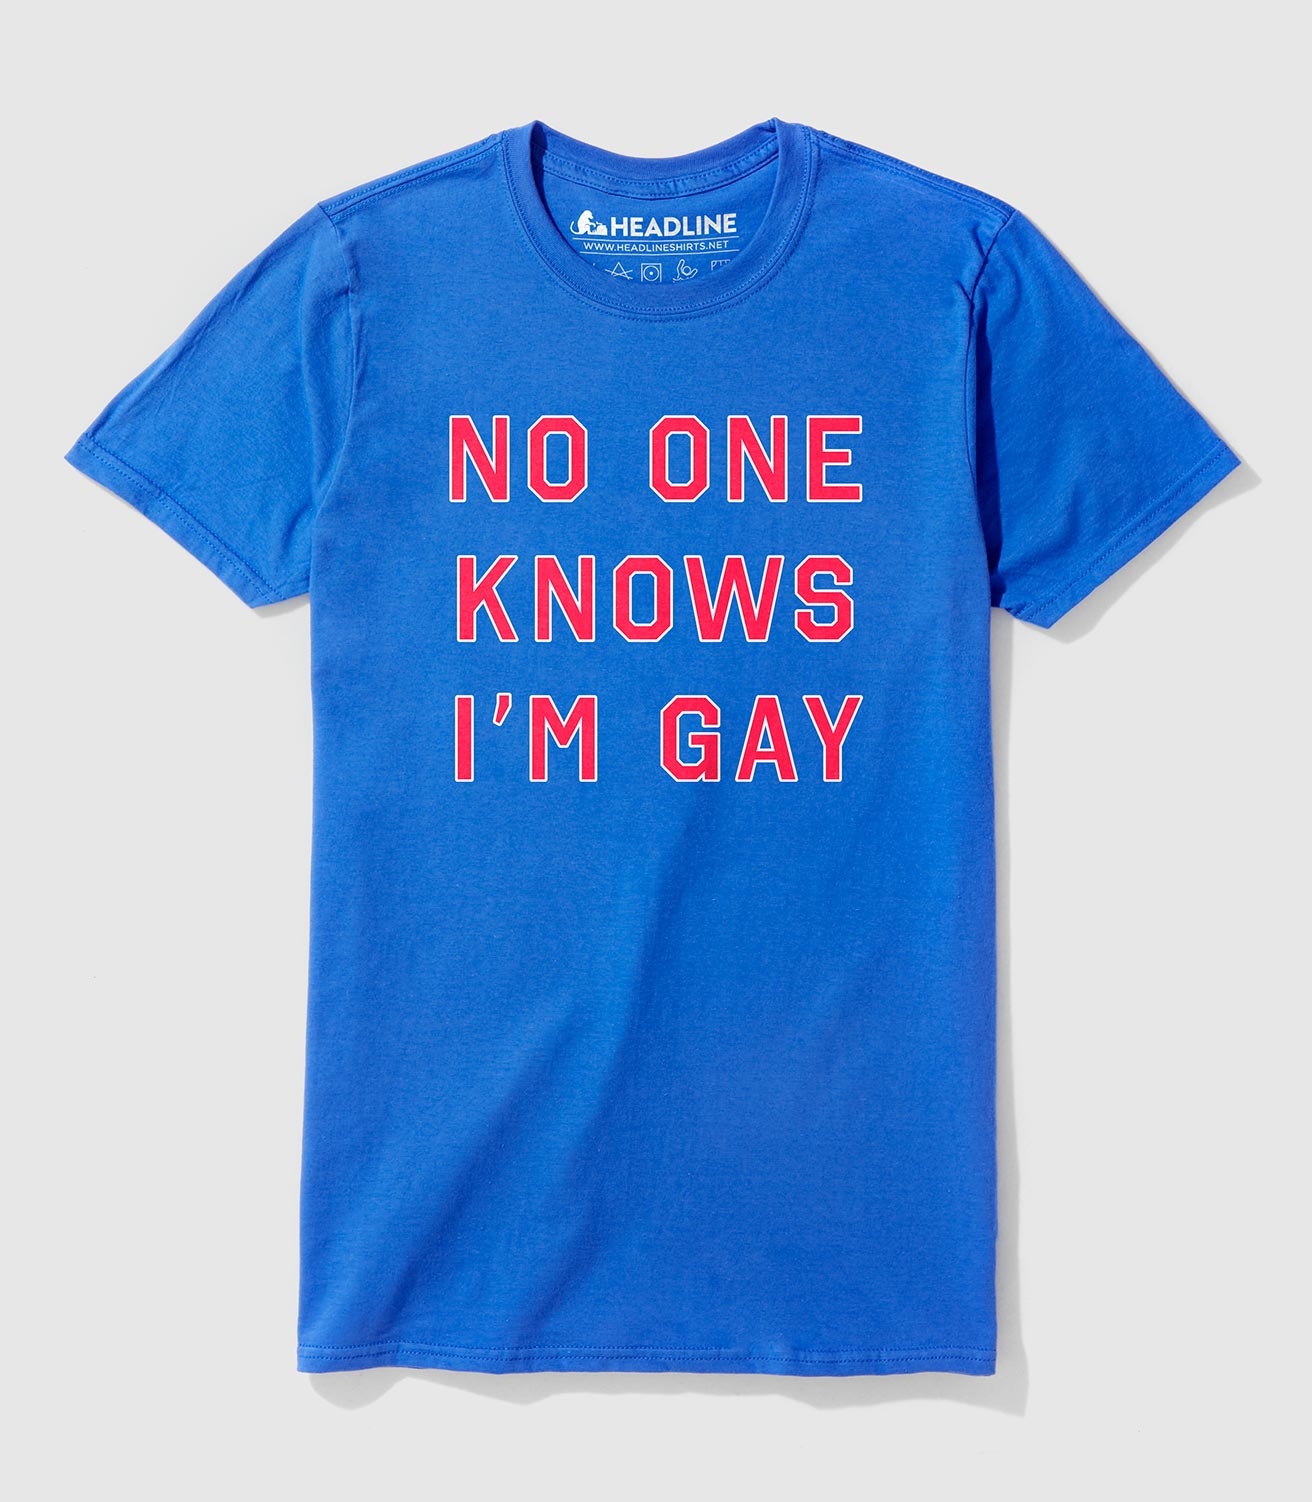 No One Knows I'm Gay Unisex 100% Cotton T-Shirt